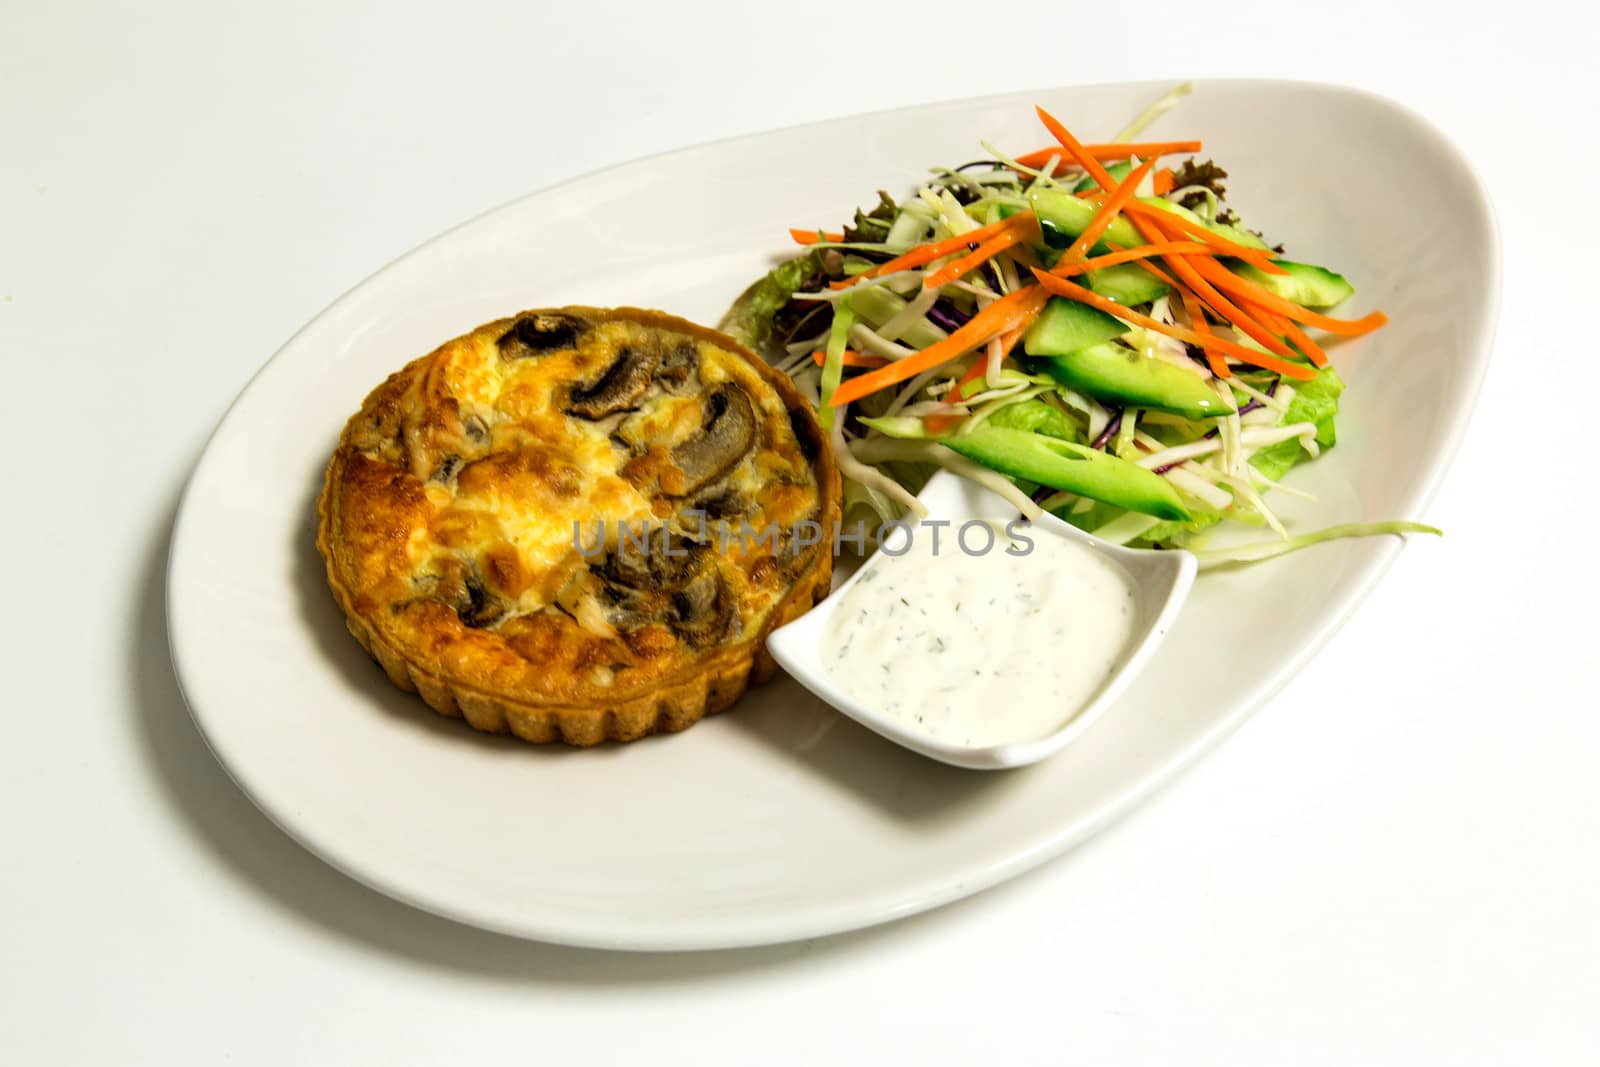 Pie, chopped vegetables salad and mayonnaise sauce